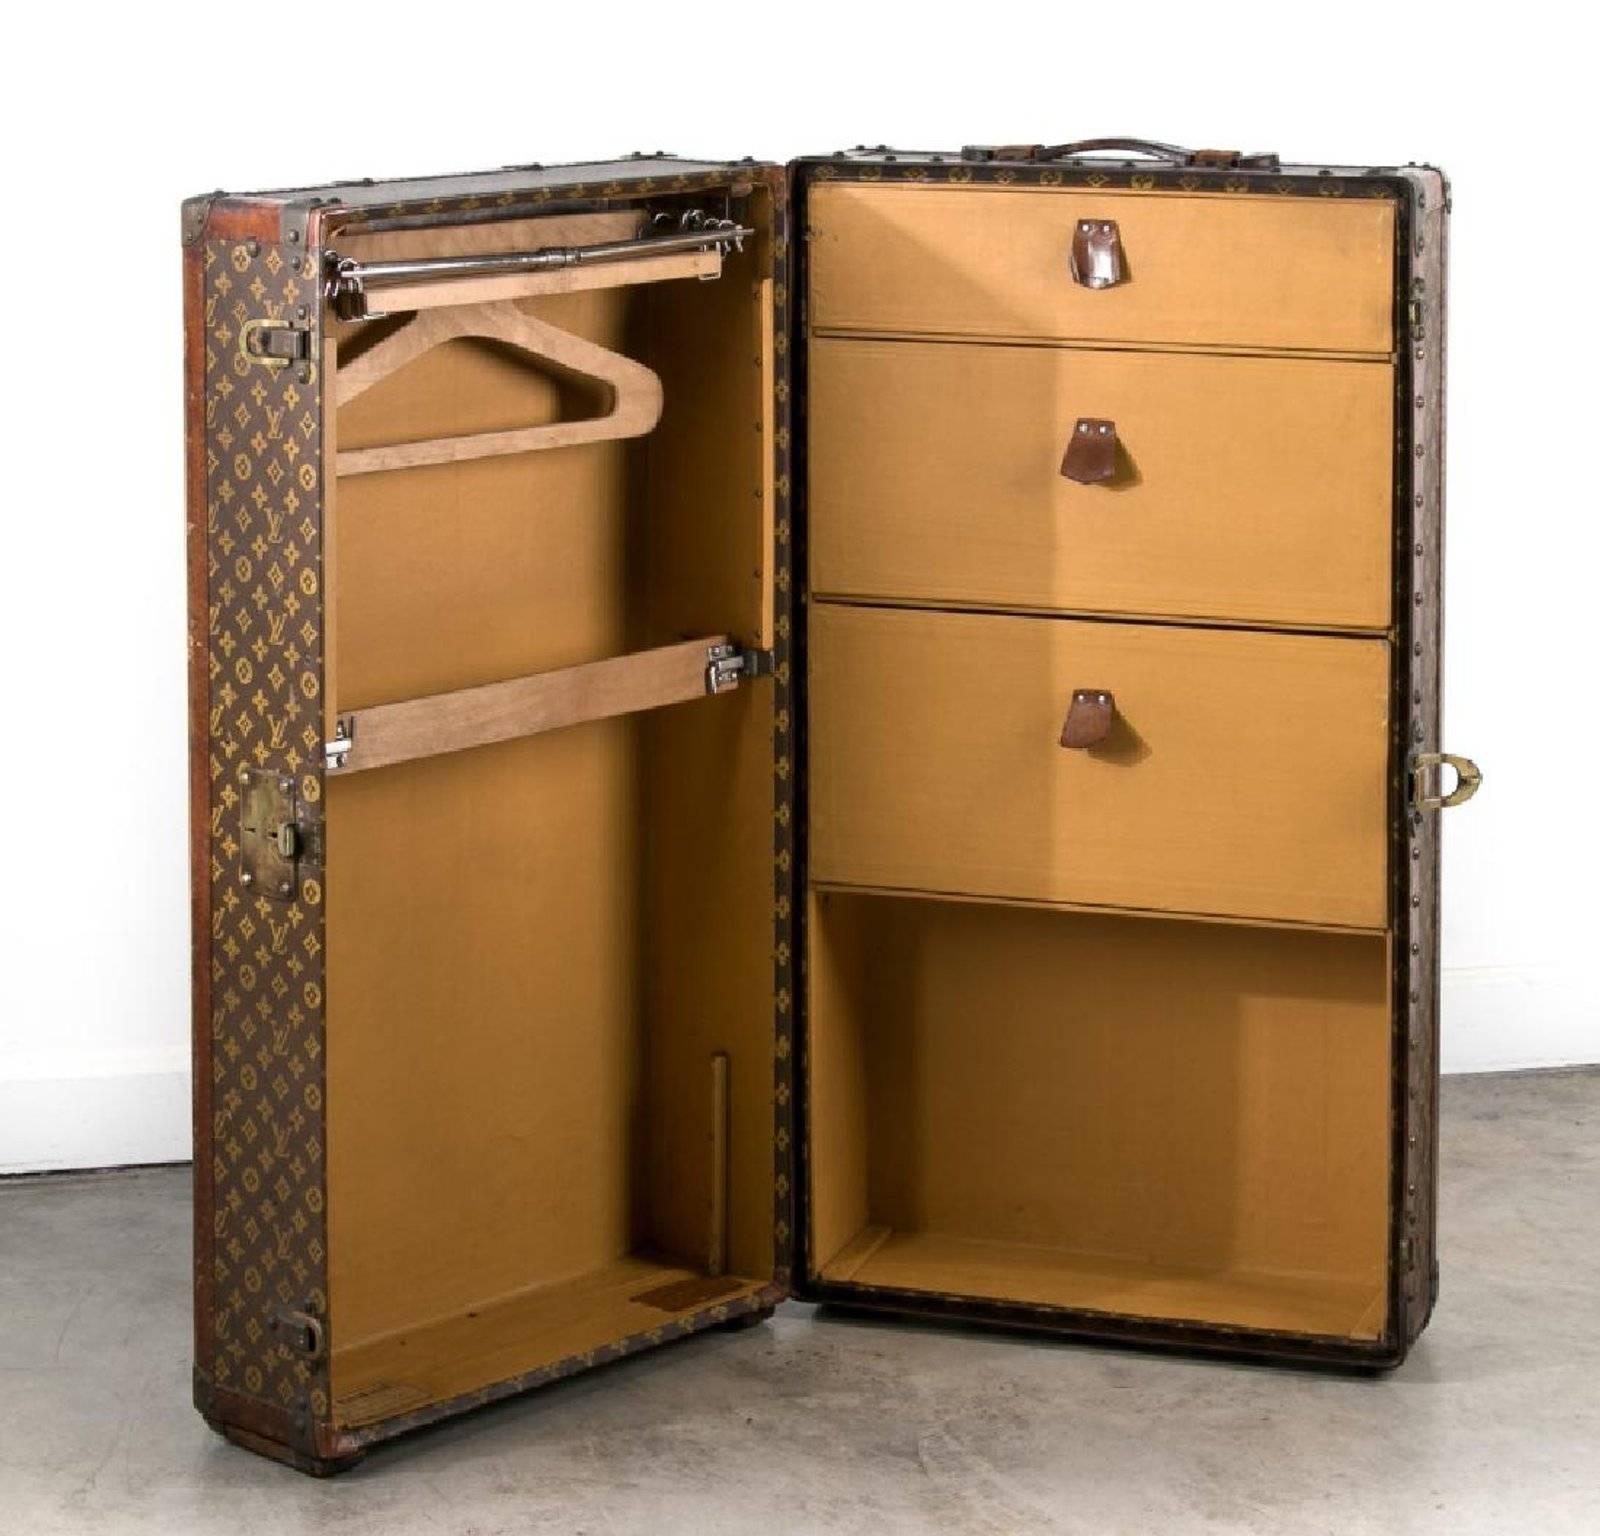 Louis Vuitton, early 20th century
Vintage steamer wardrobe trunk, the interior fitted with drawers and hangers
Brass lock on front stamped 